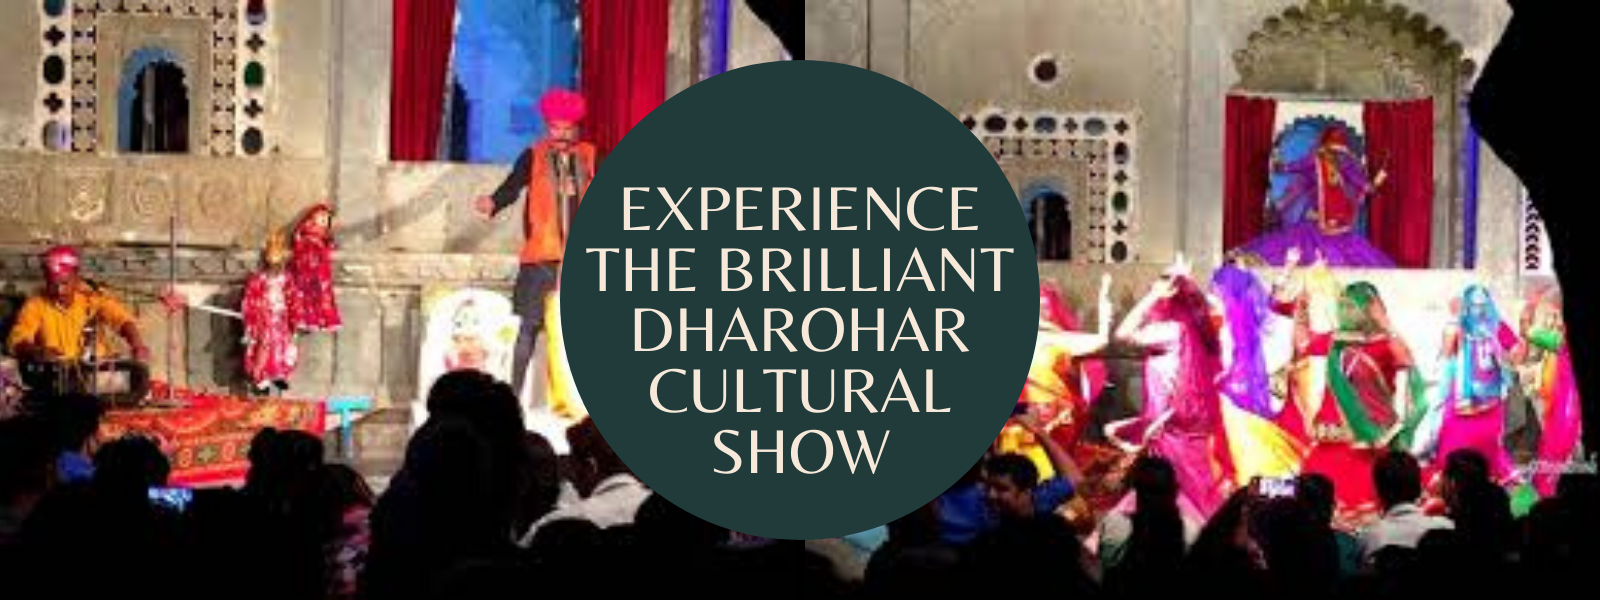 Experience the Brilliant Dharohar Cultural Show 